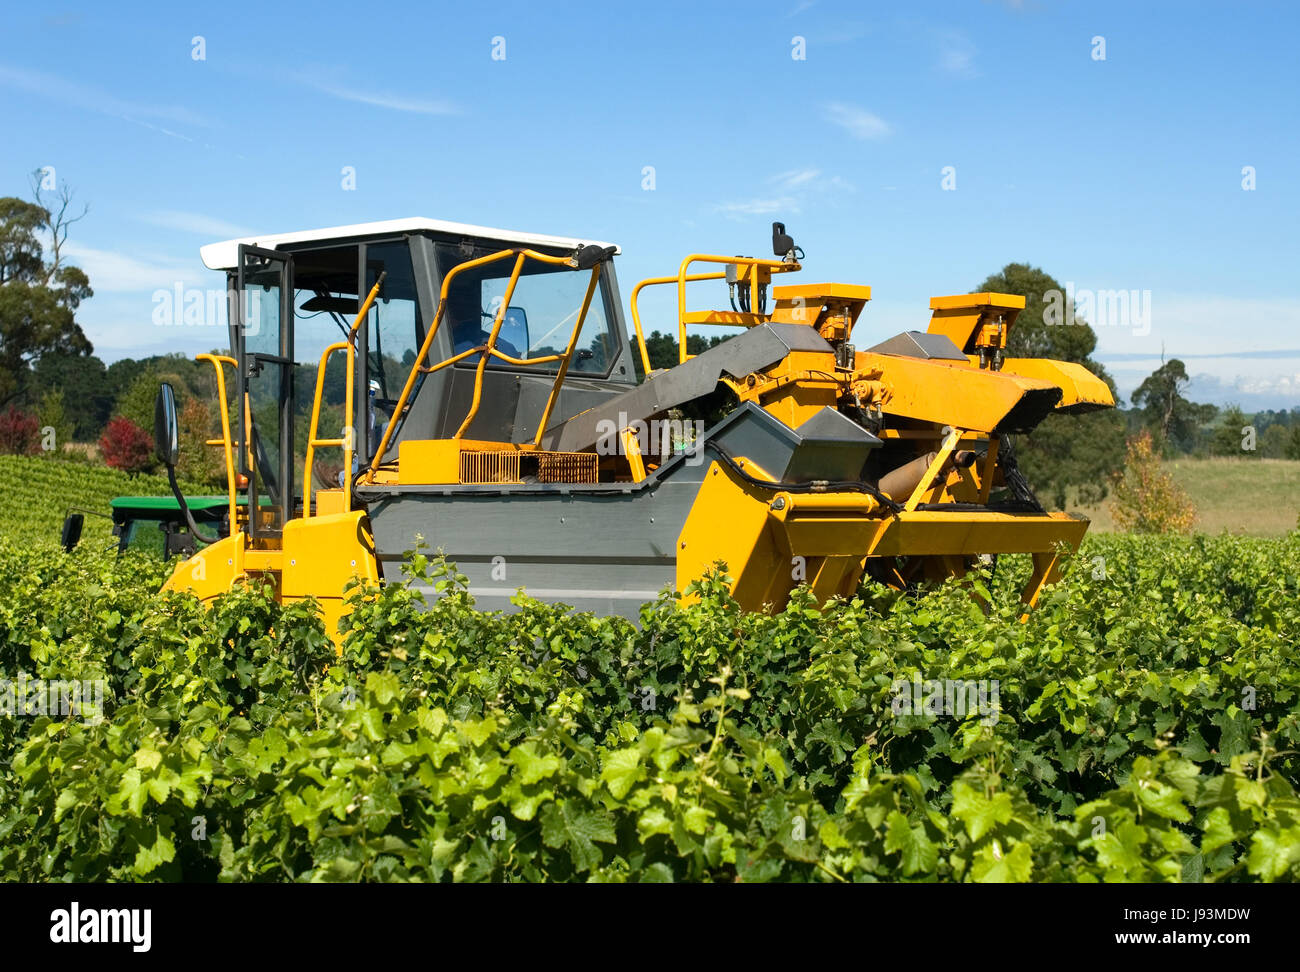 tree, trees, machinery, leaves, agriculture, farming, grapes, harvest, Stock Photo